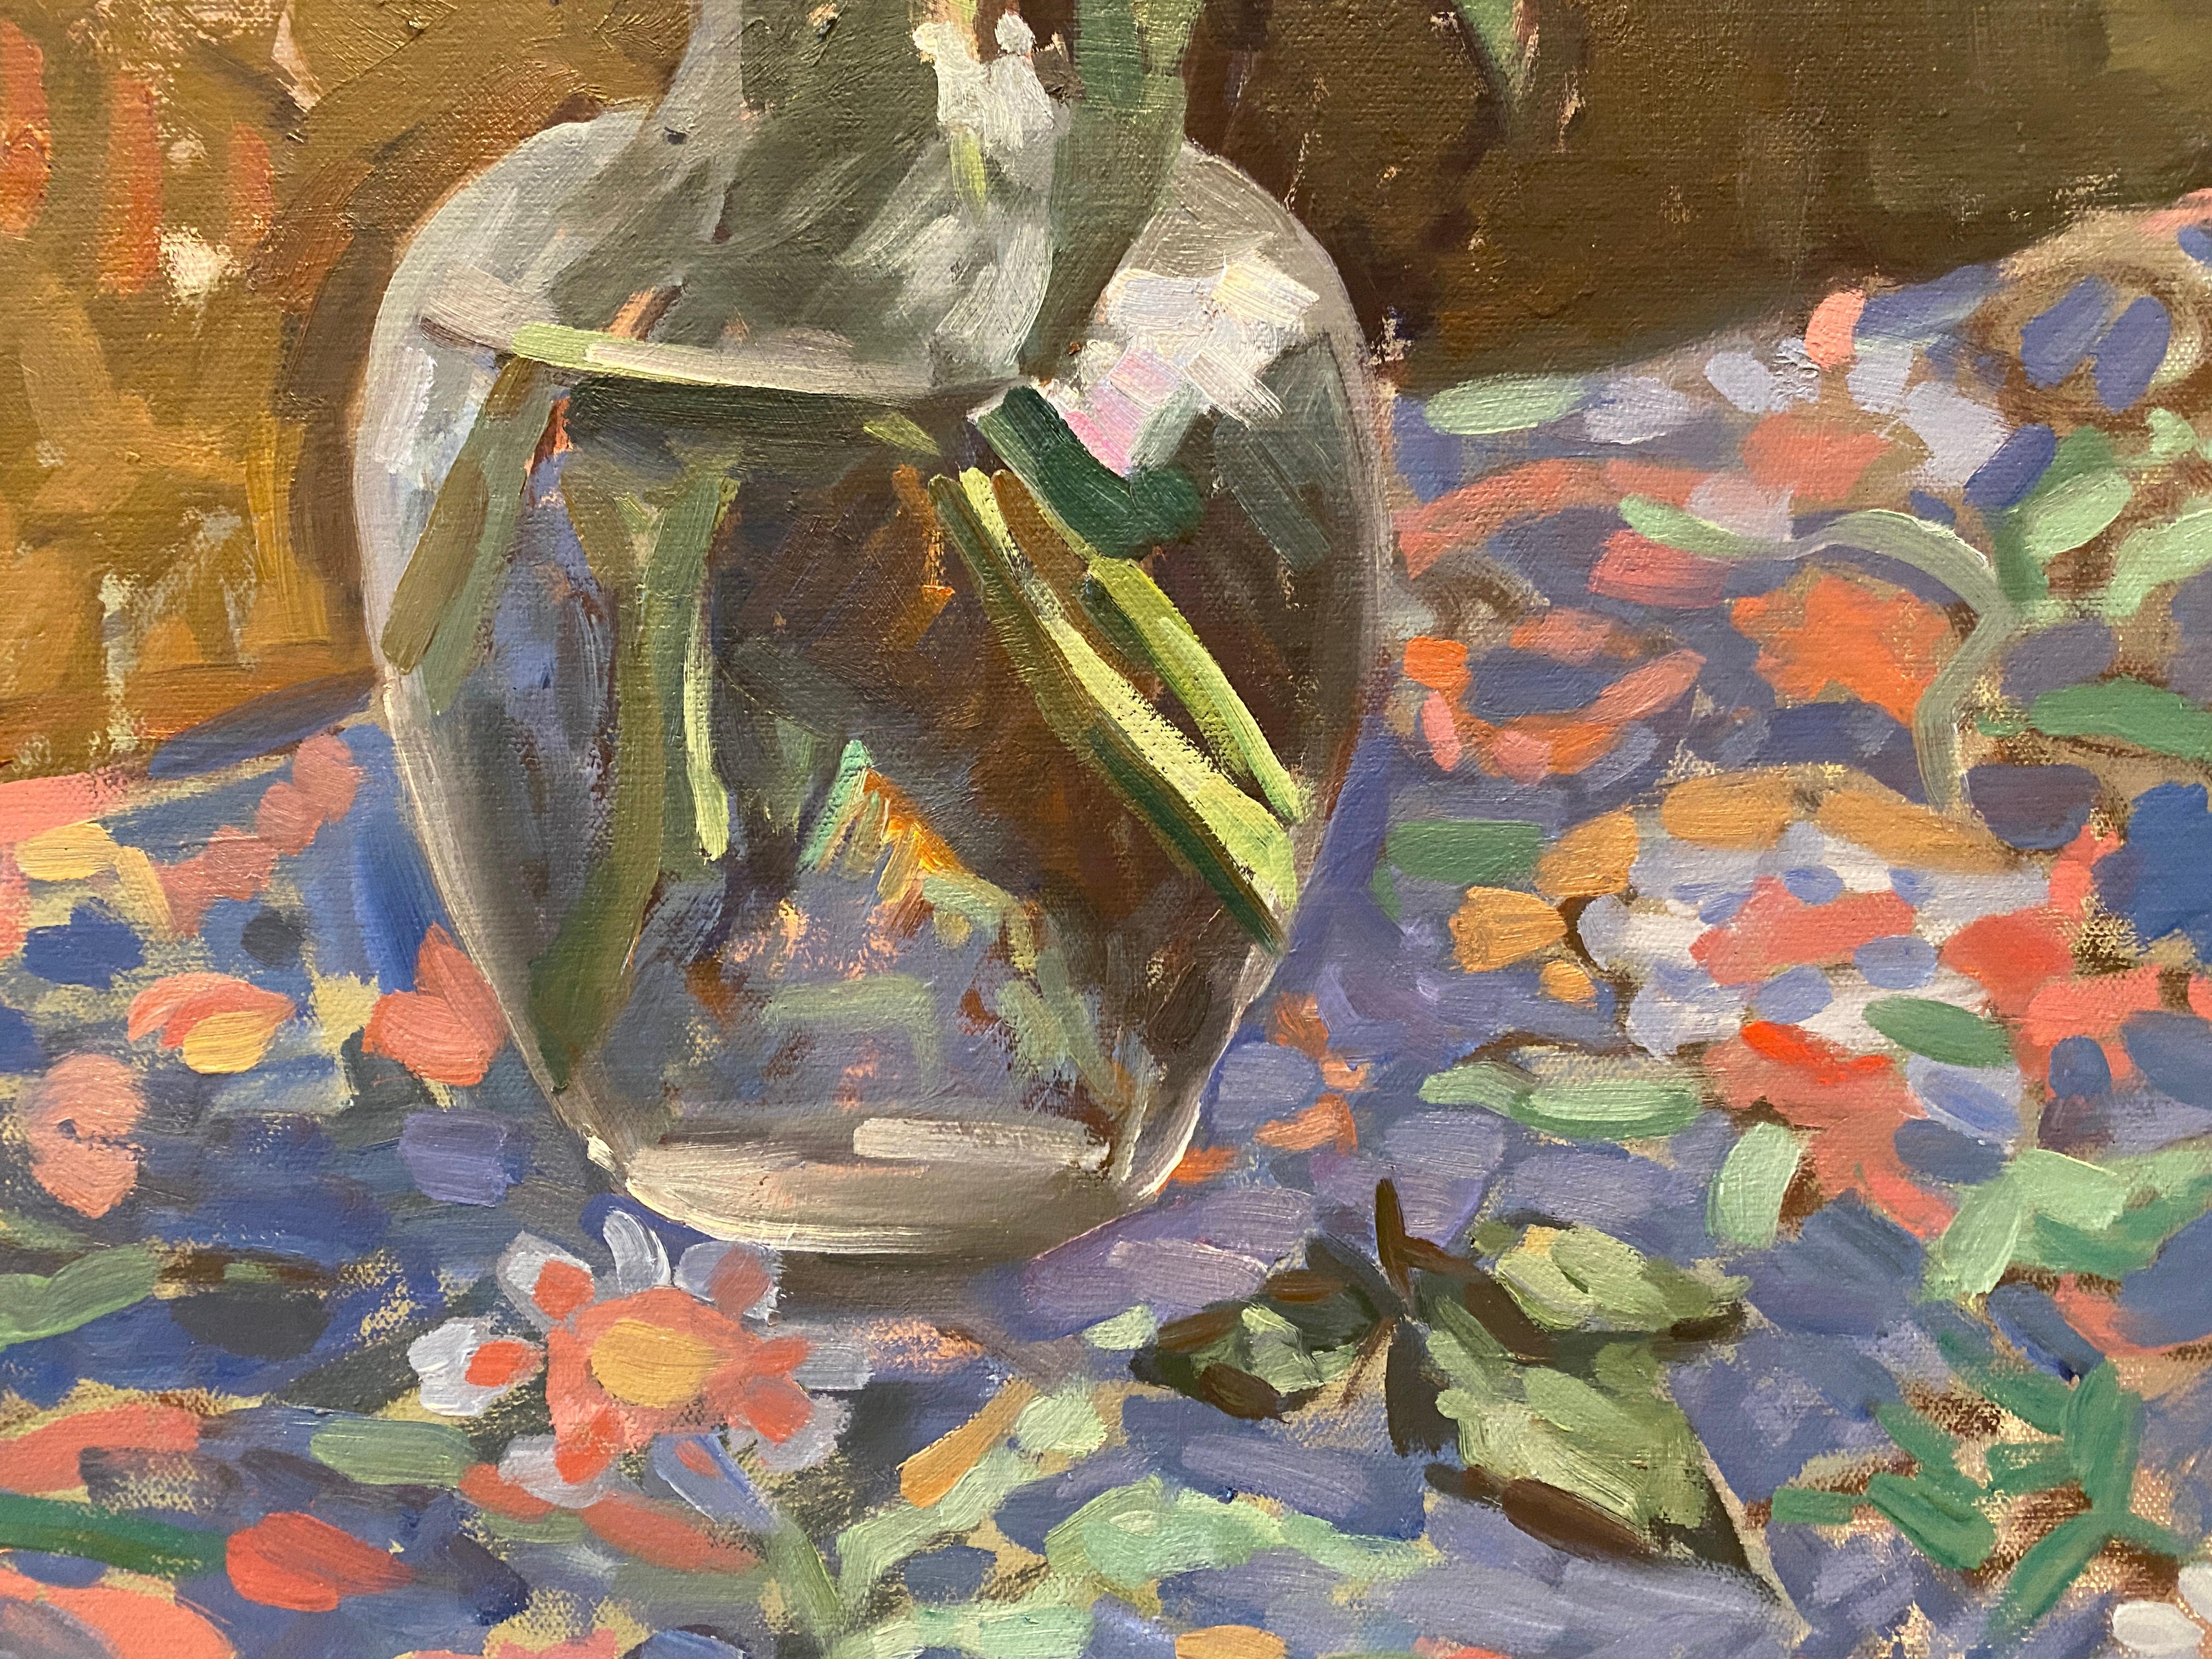 A still life oil painting of Sant Ambrogio flowers in a glass vase on a patterned tablecloth. This is an excellent example of the artist's work. An enthusiastic lover of nature, the artist reveals a keen and sensitive botanical eye. The artist